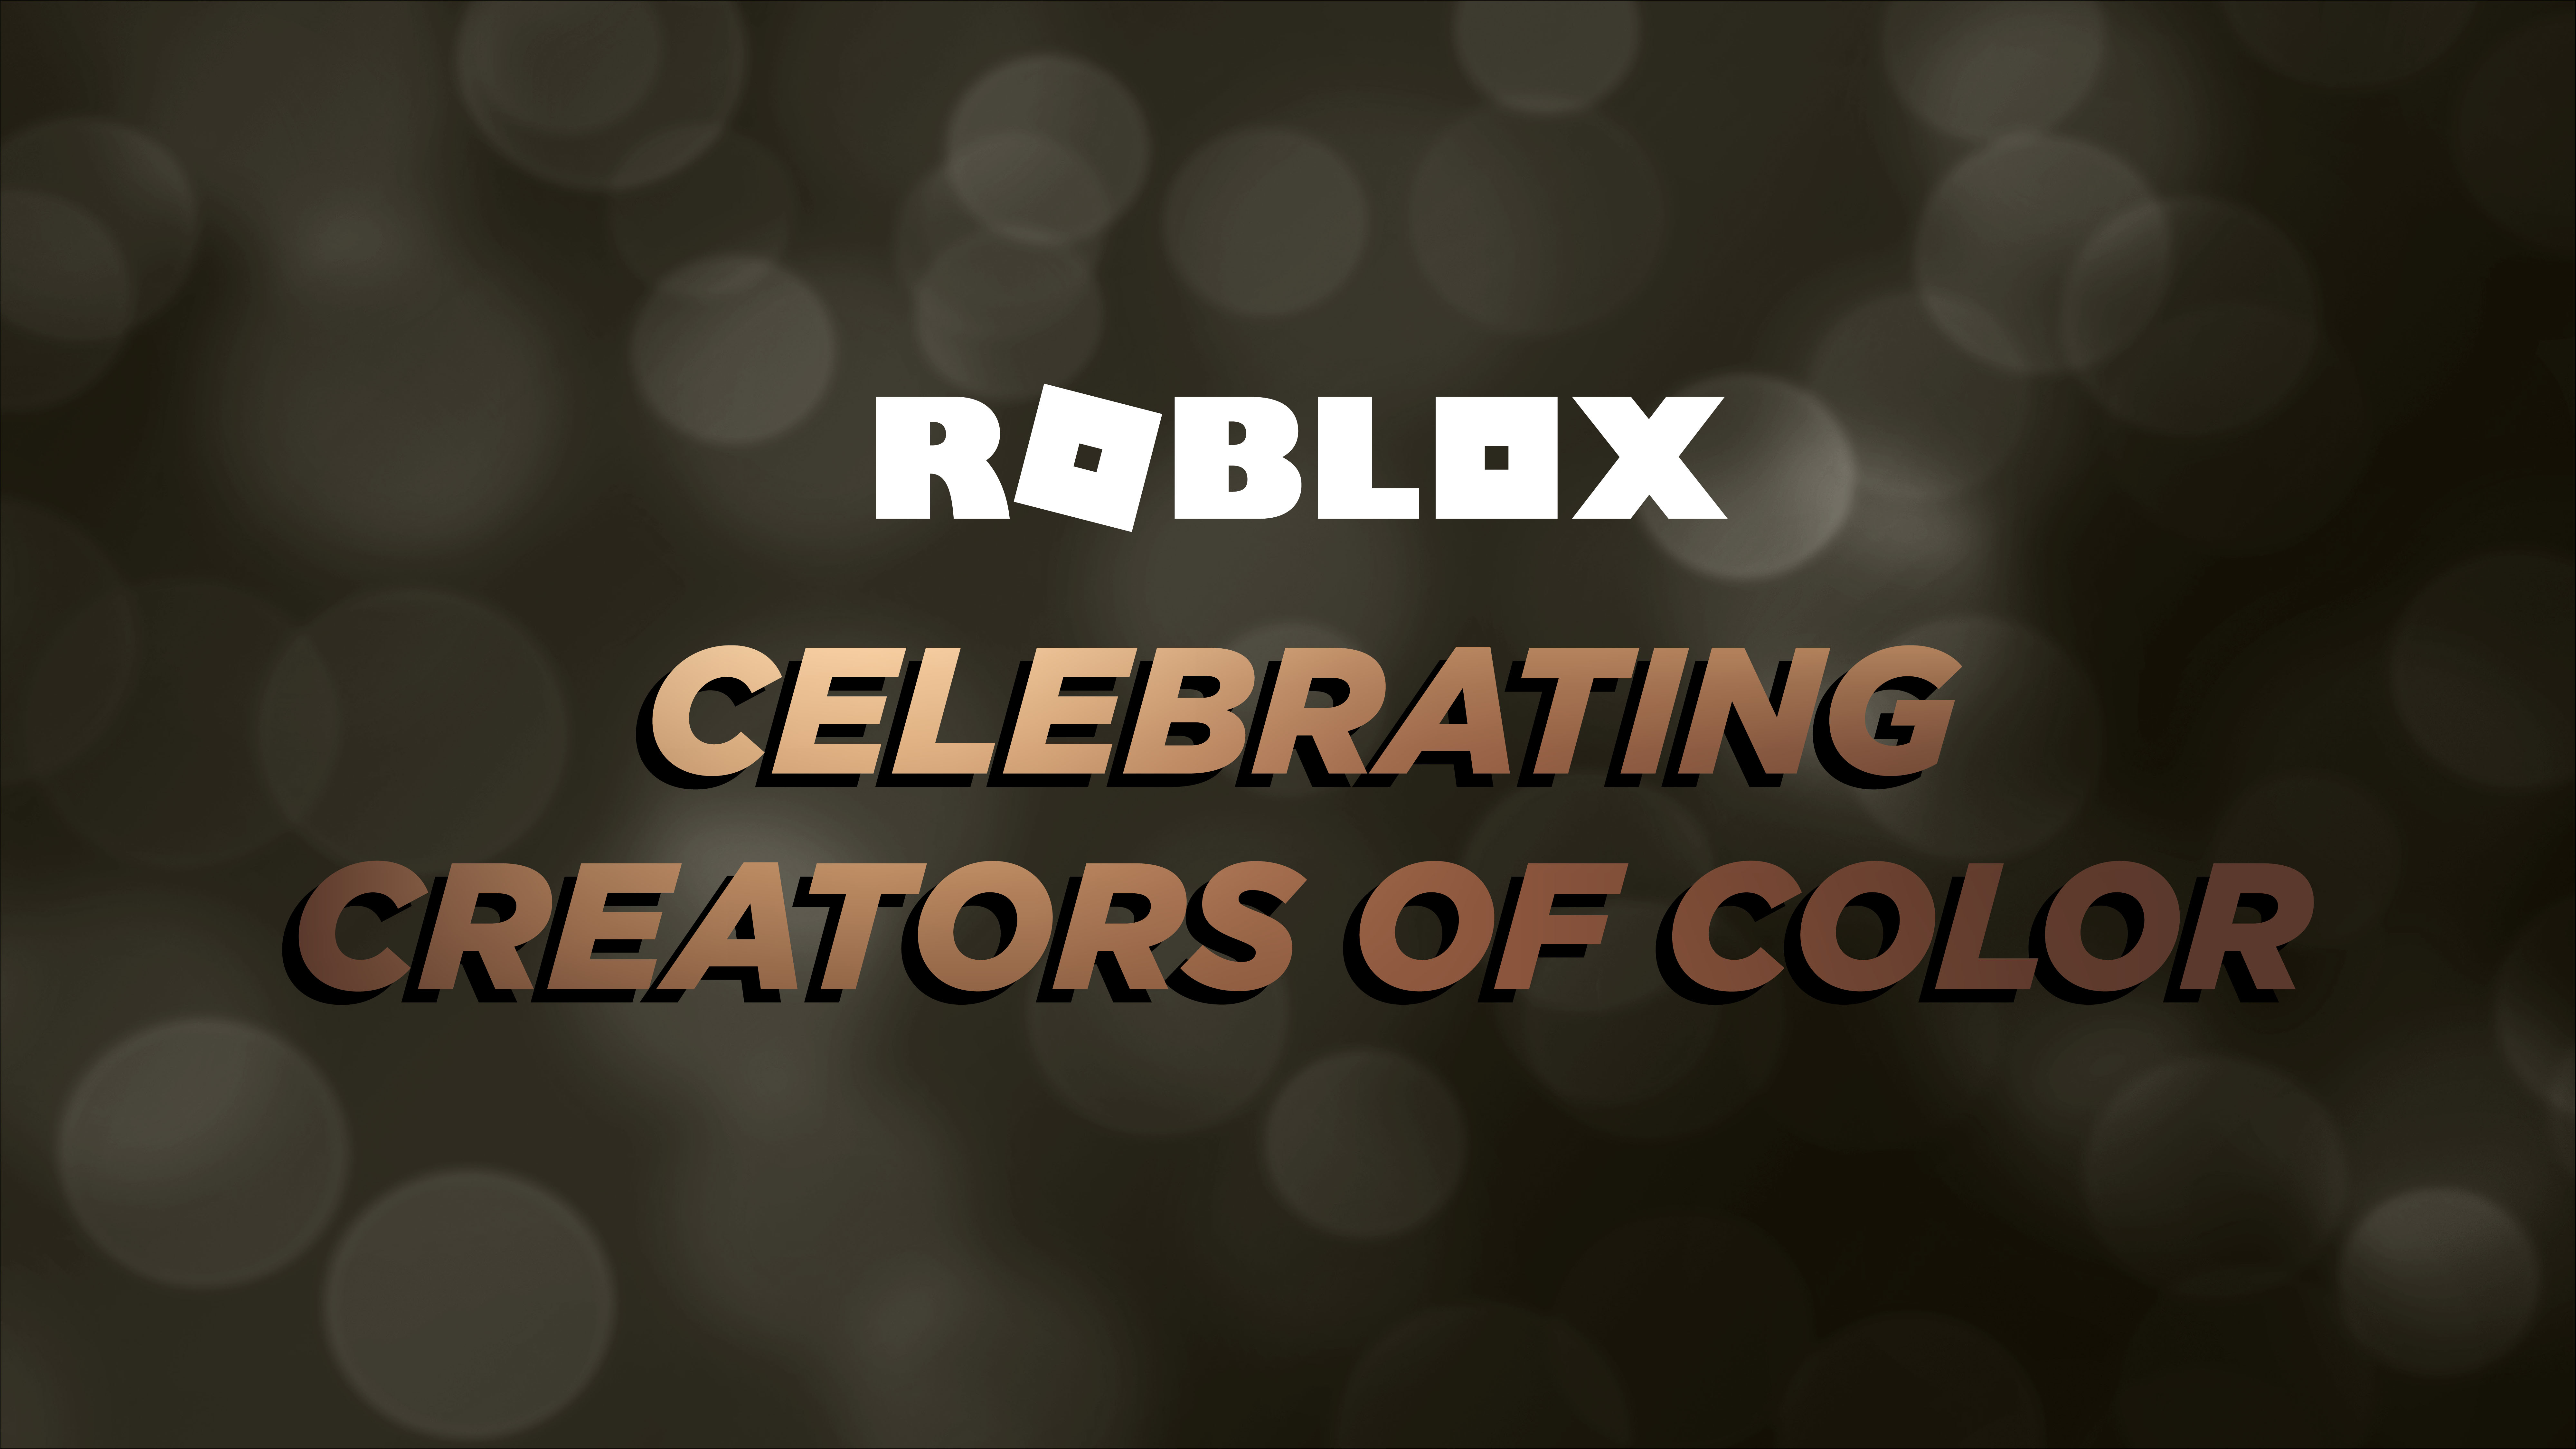 Roblox Blog - Archives of old roblox blogs.